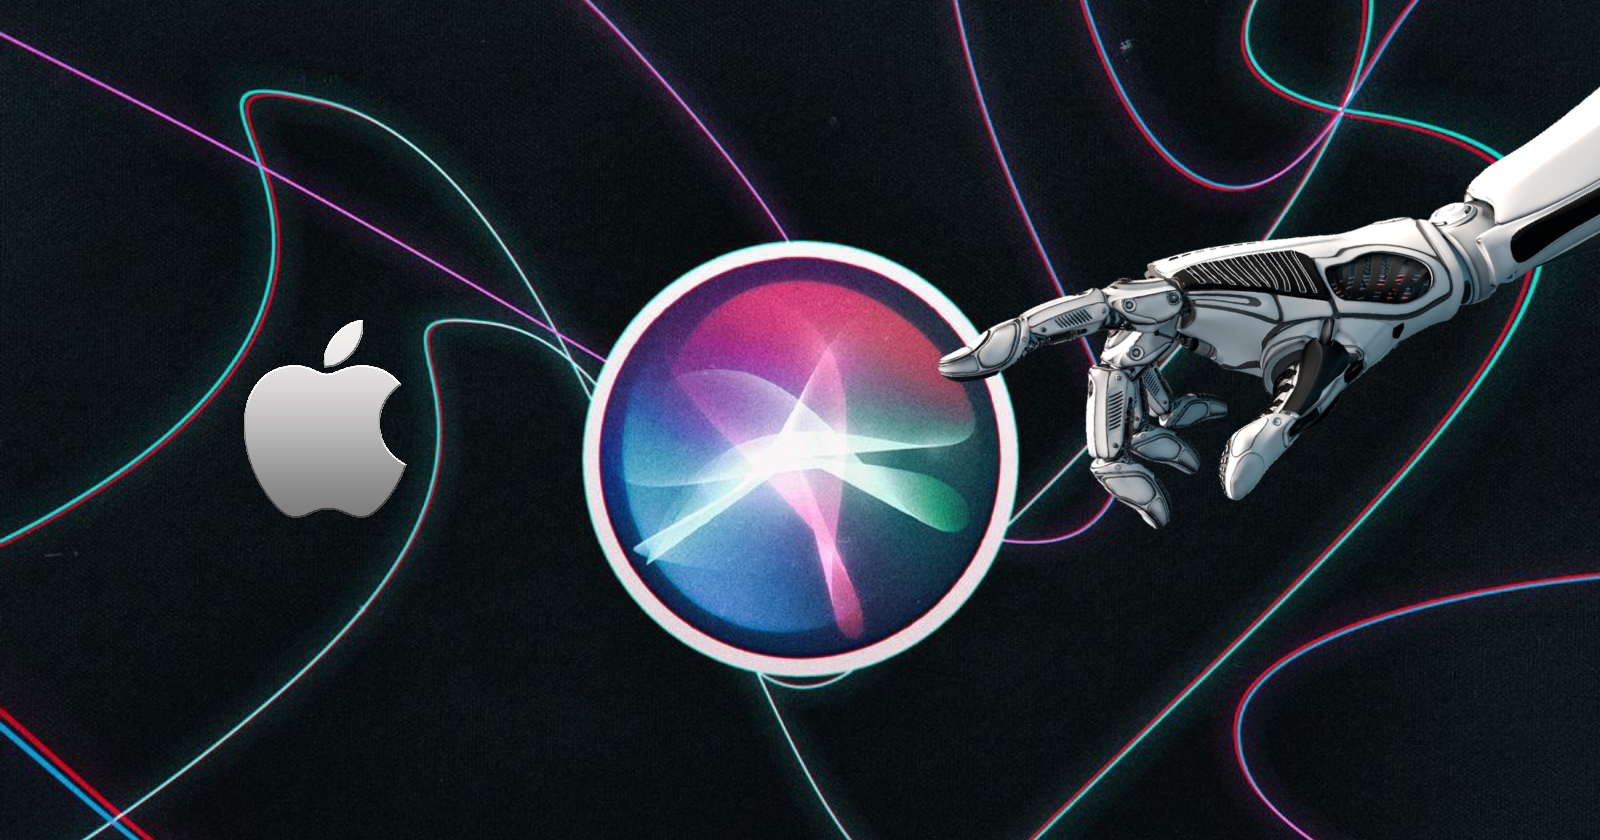 Apple is confused! Last minute decision for artificial intelligence and Siri